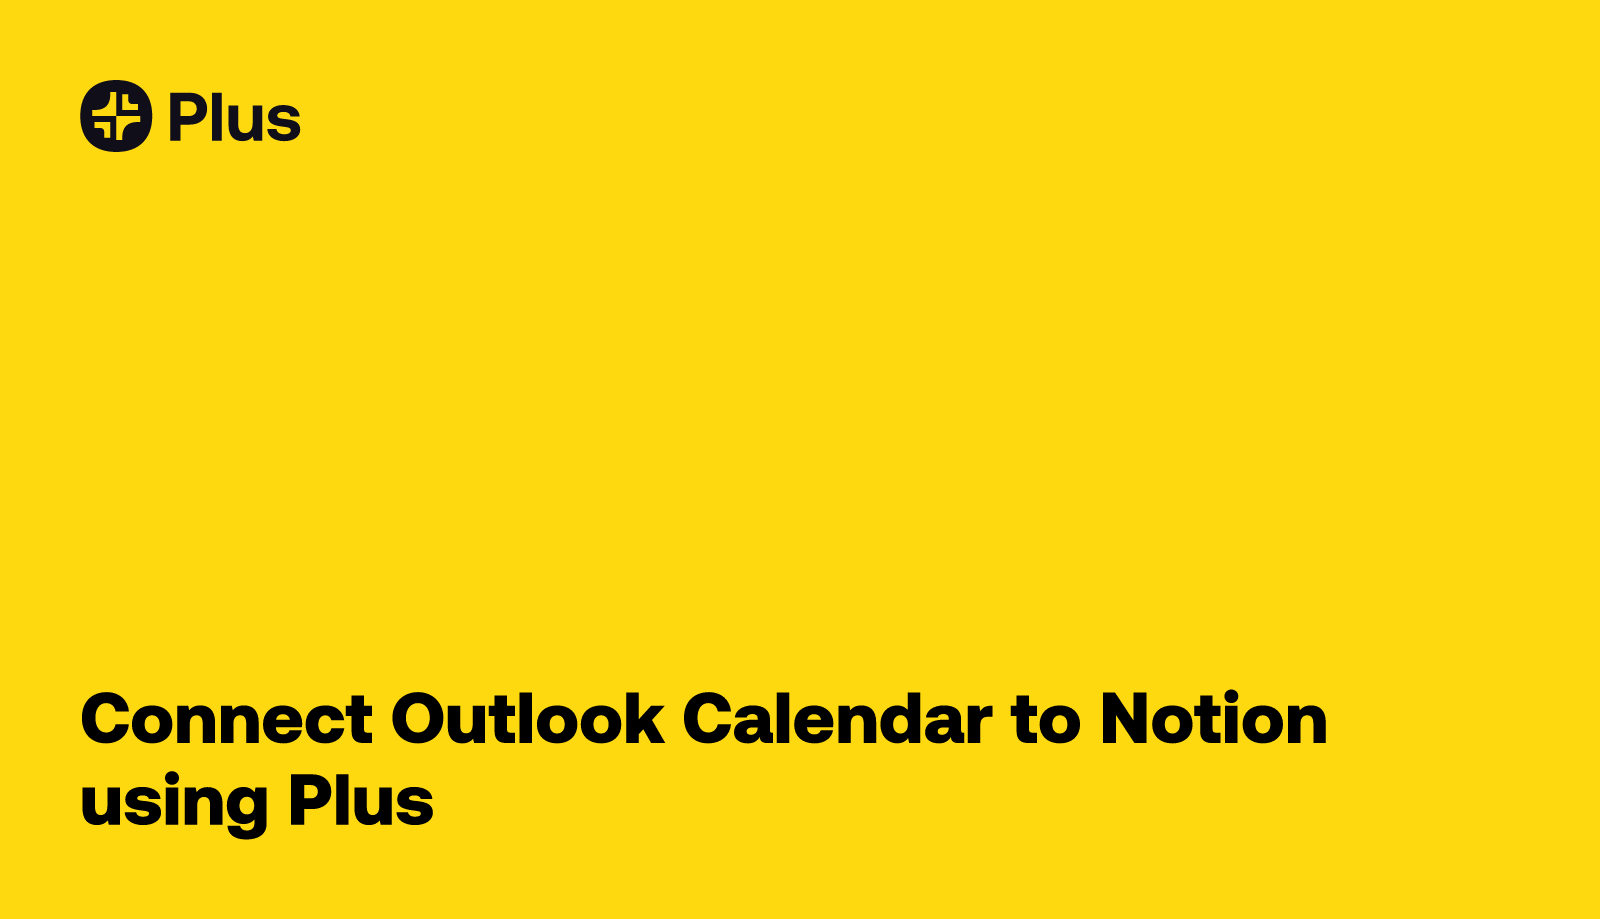 Outlook Calendar and Notion integration using Plus Plus